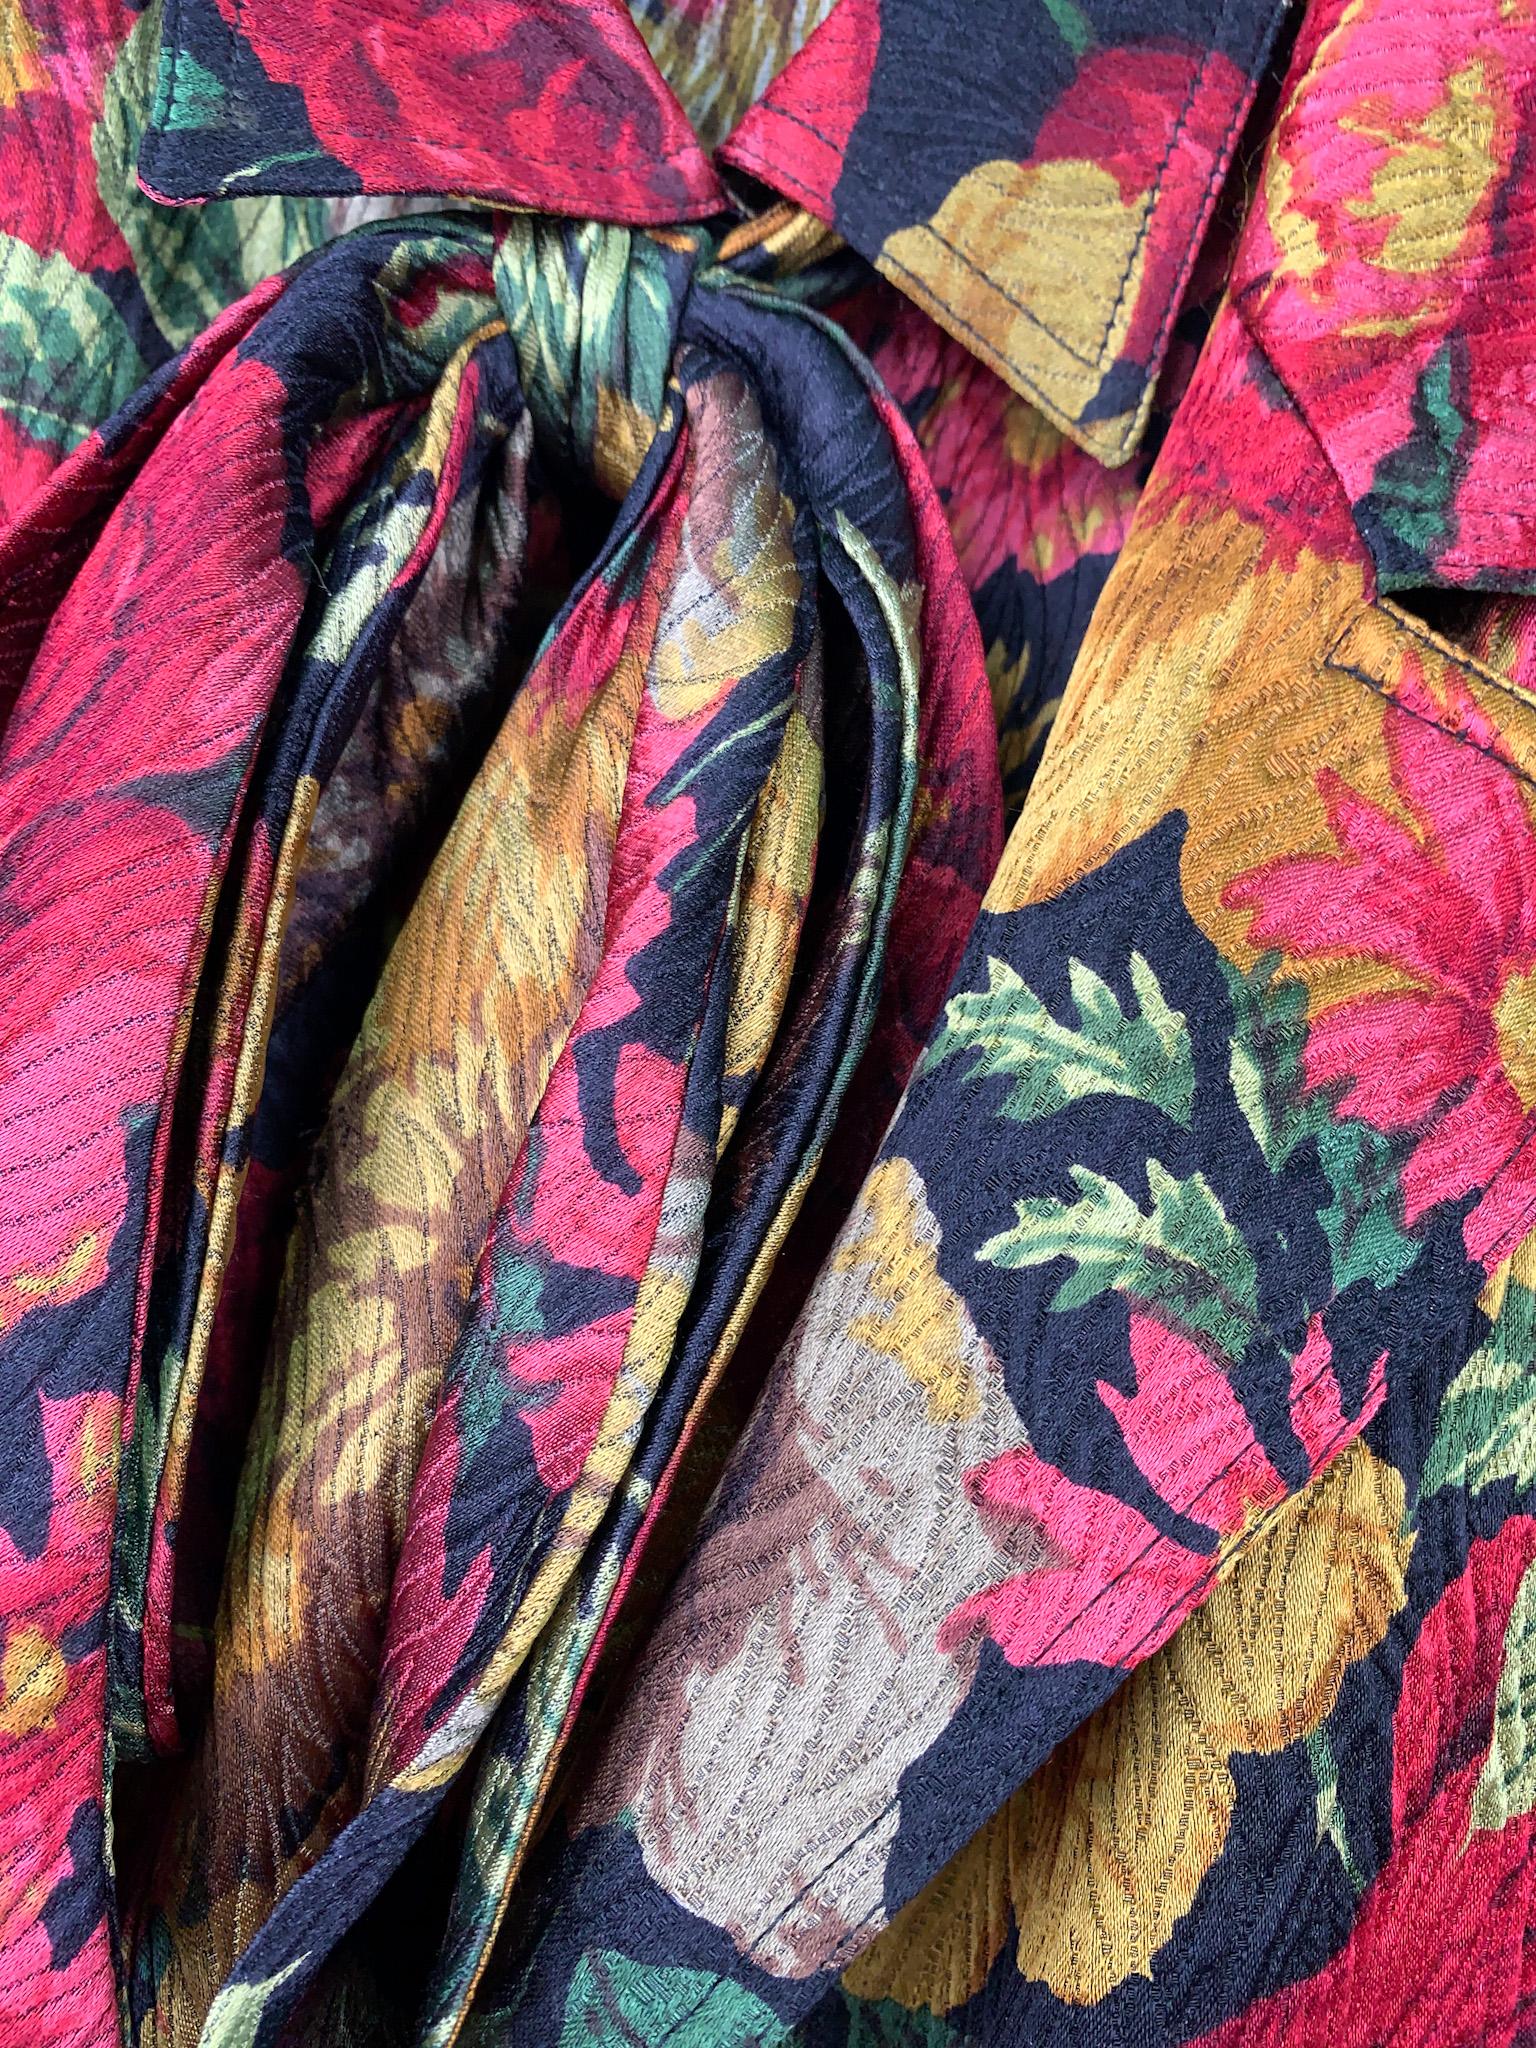 Vintage 80s Valentino Miss V multicolour floral silk two-piece ensemble of a single-breasted blazer and a blouse with bijou buttons and bow details.
Note the very dressy fabric - floral silk jacquard with fine embroidery that creates a subtle